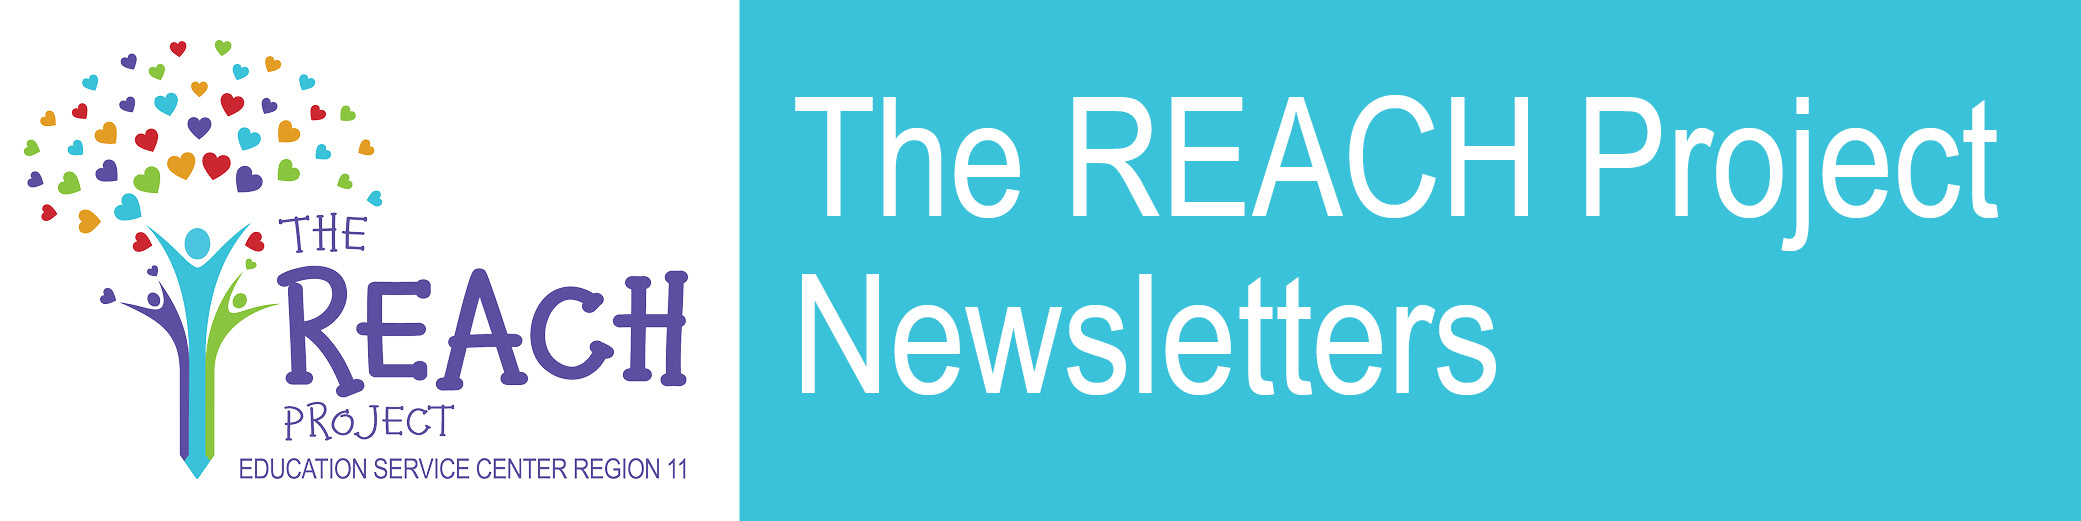 The REACH Project Newsletters